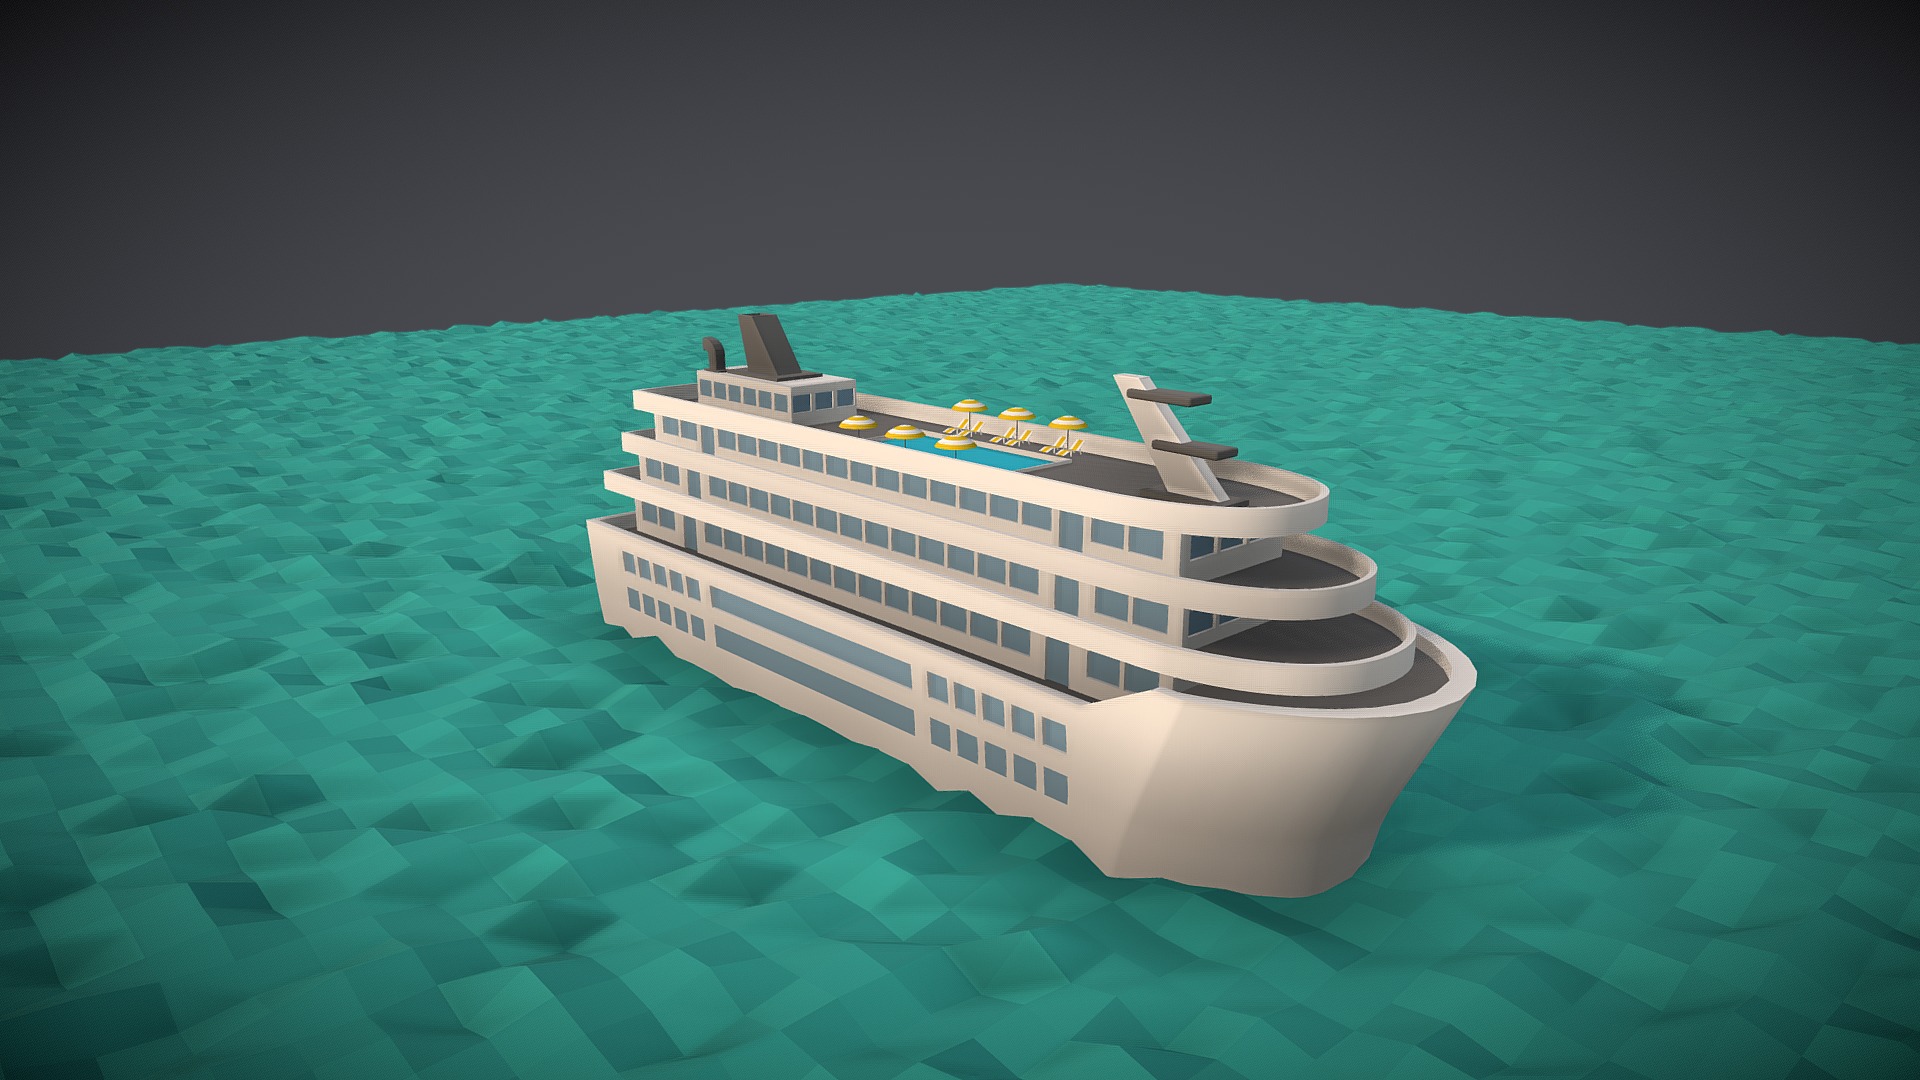 3D model Low-Poly Yacht - This is a 3D model of the Low-Poly Yacht. The 3D model is about a large white ship in the water.